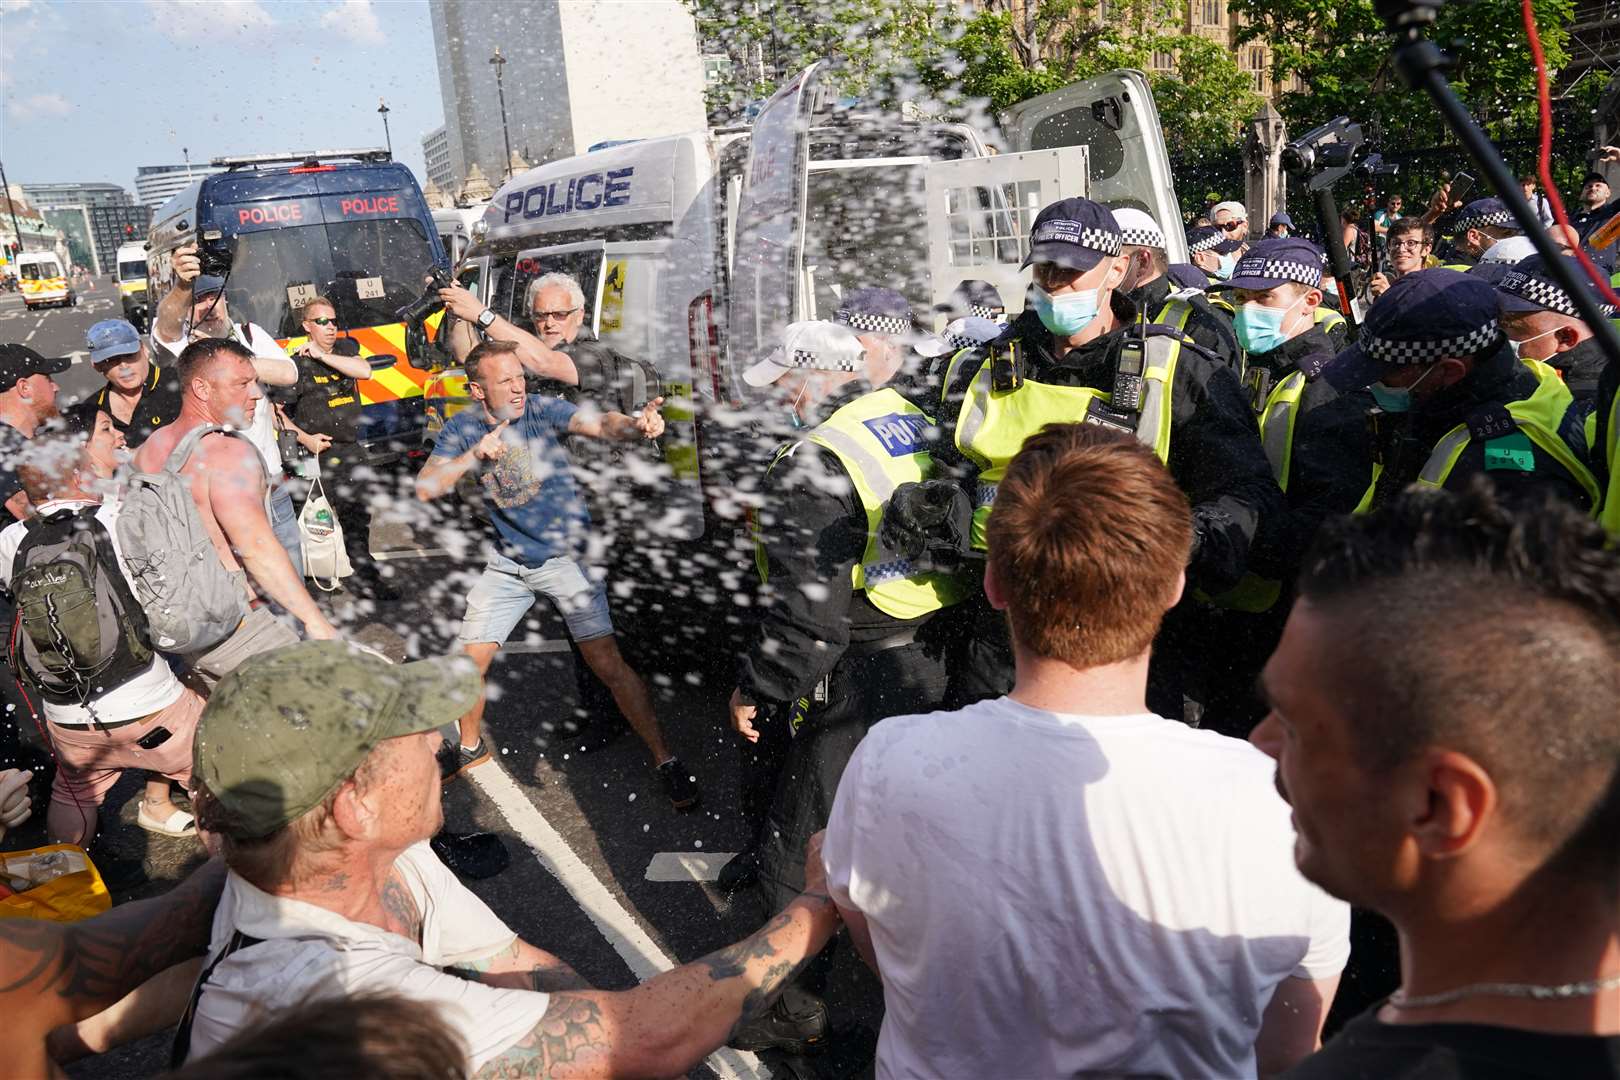 Police and protesters face each other in Parliament Square (Jonathan Brady/PA)